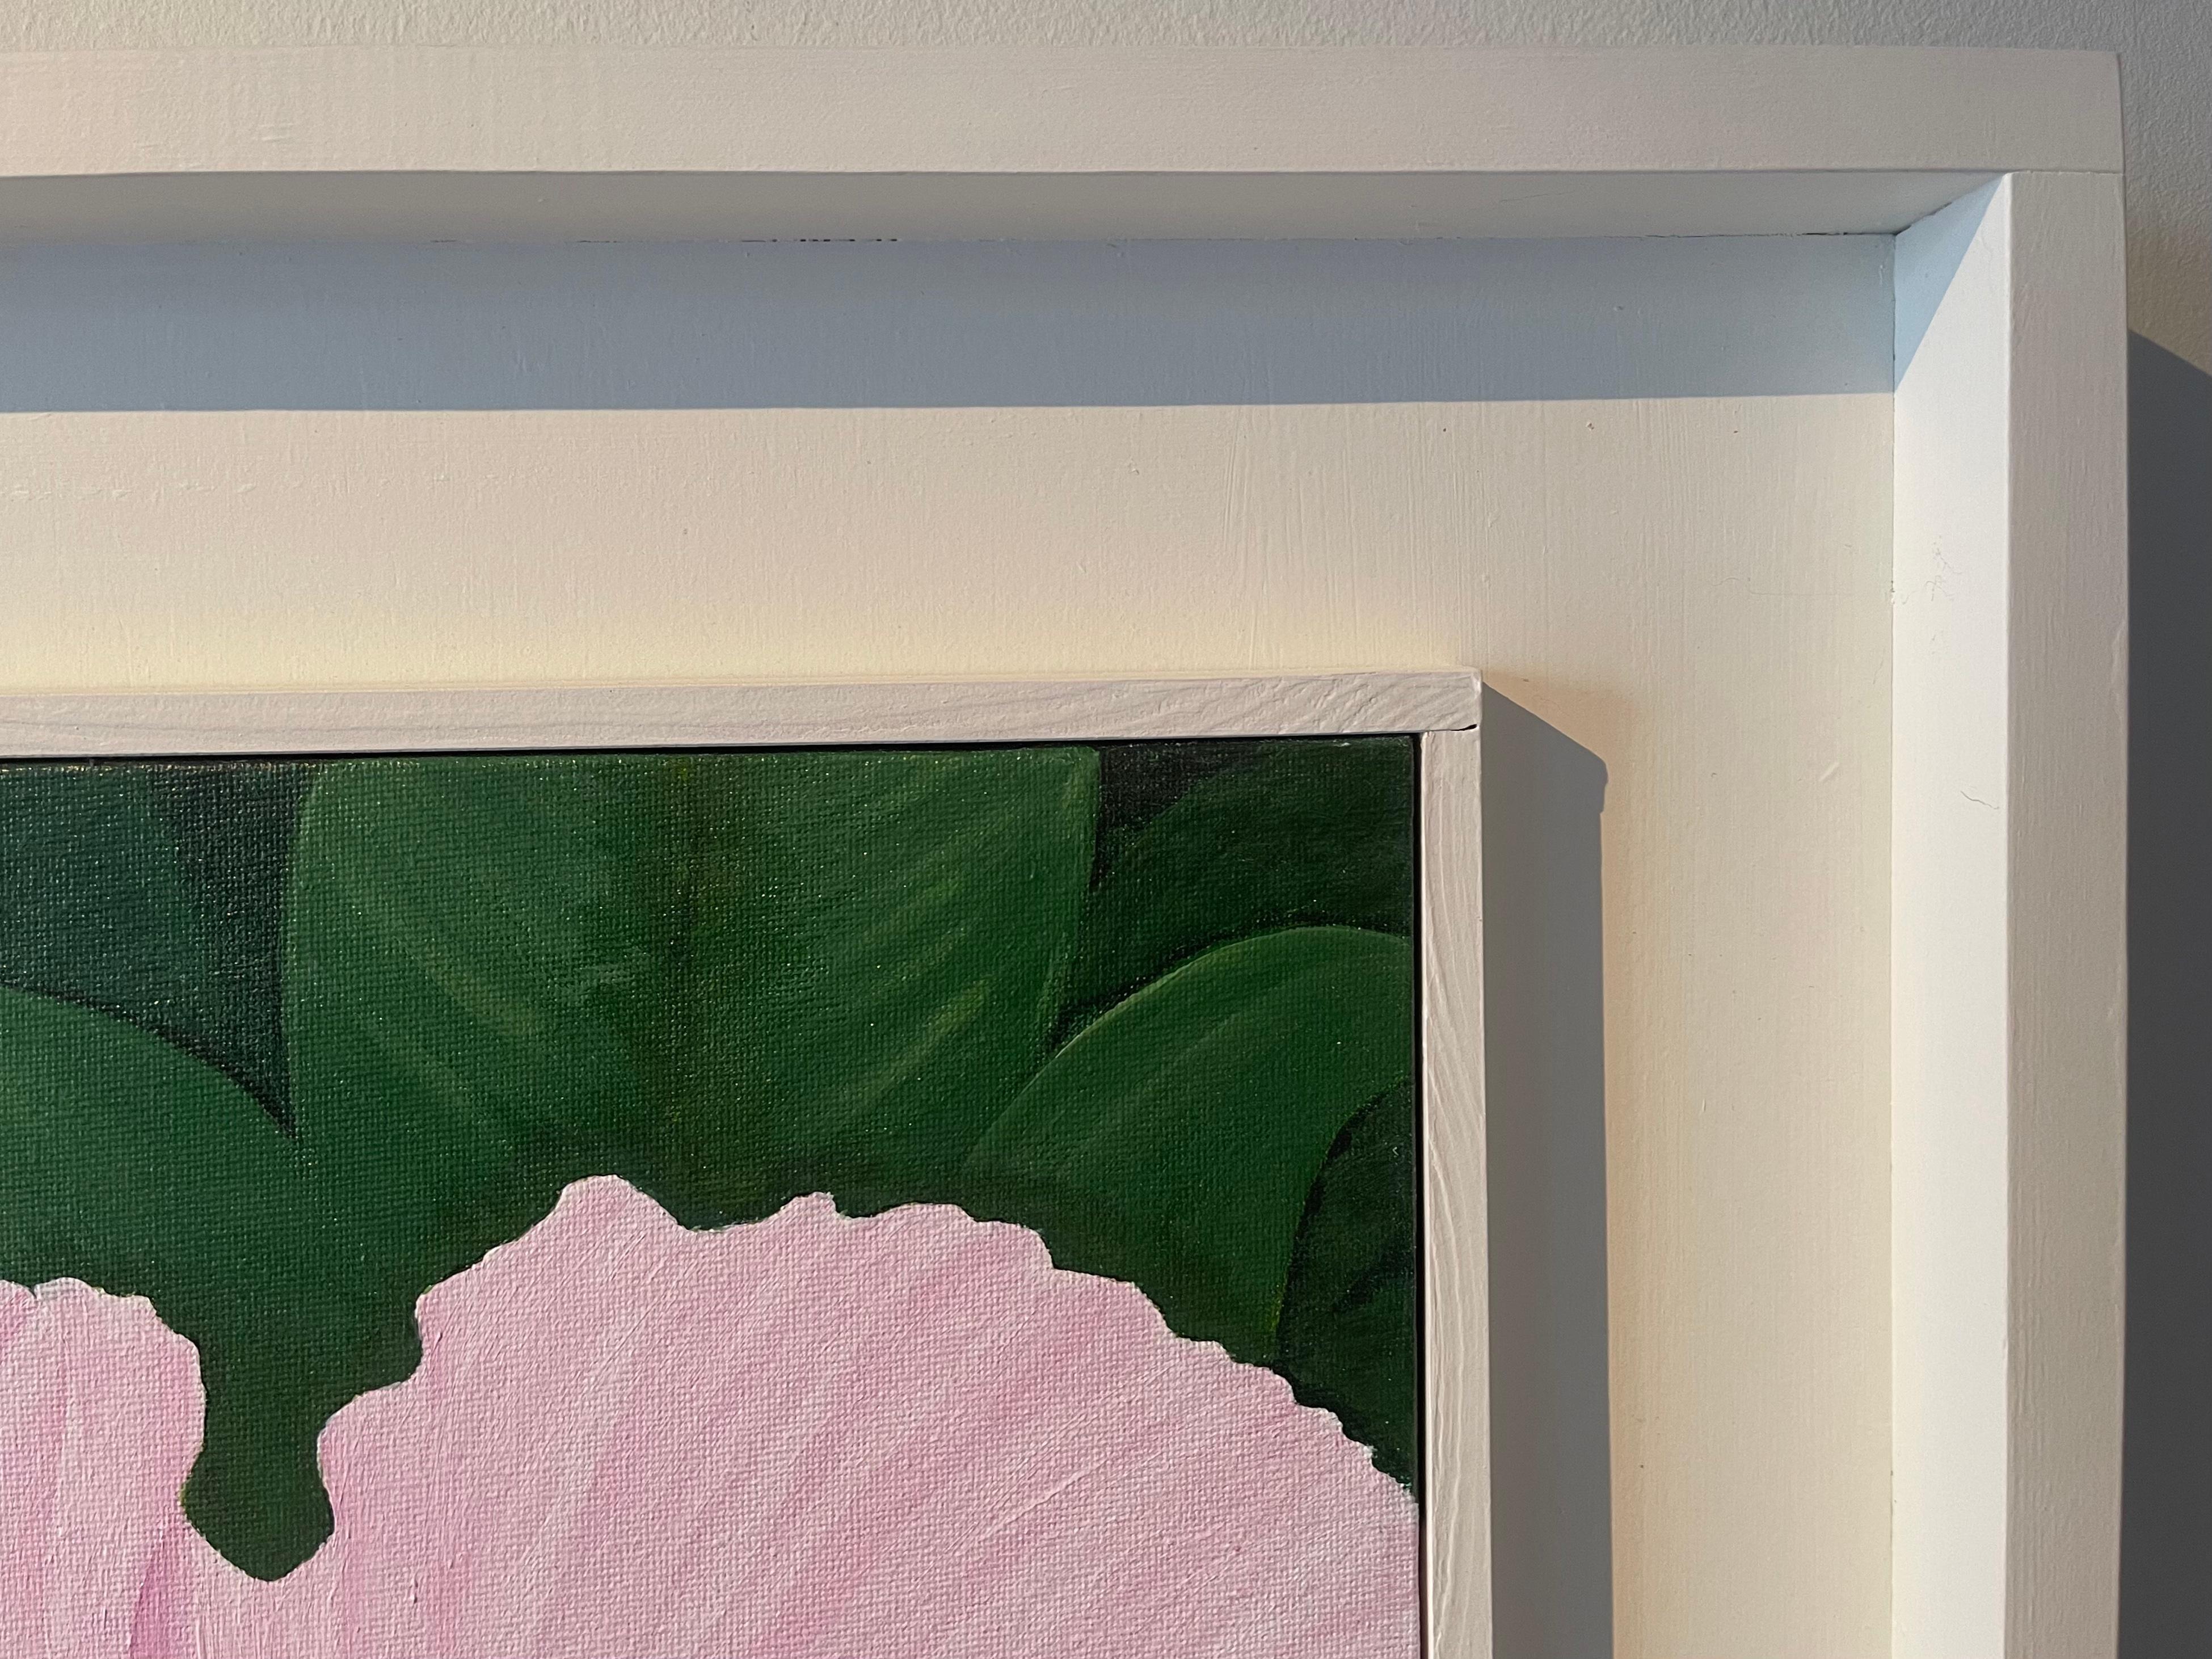 Presenting a contemporary, serene acrylic painting of a single flower exuding a joyous elegance. The up-close pink flower composition is delicately portrayed with thin and controlled brushstrokes, providing a realistic and immersive viewing